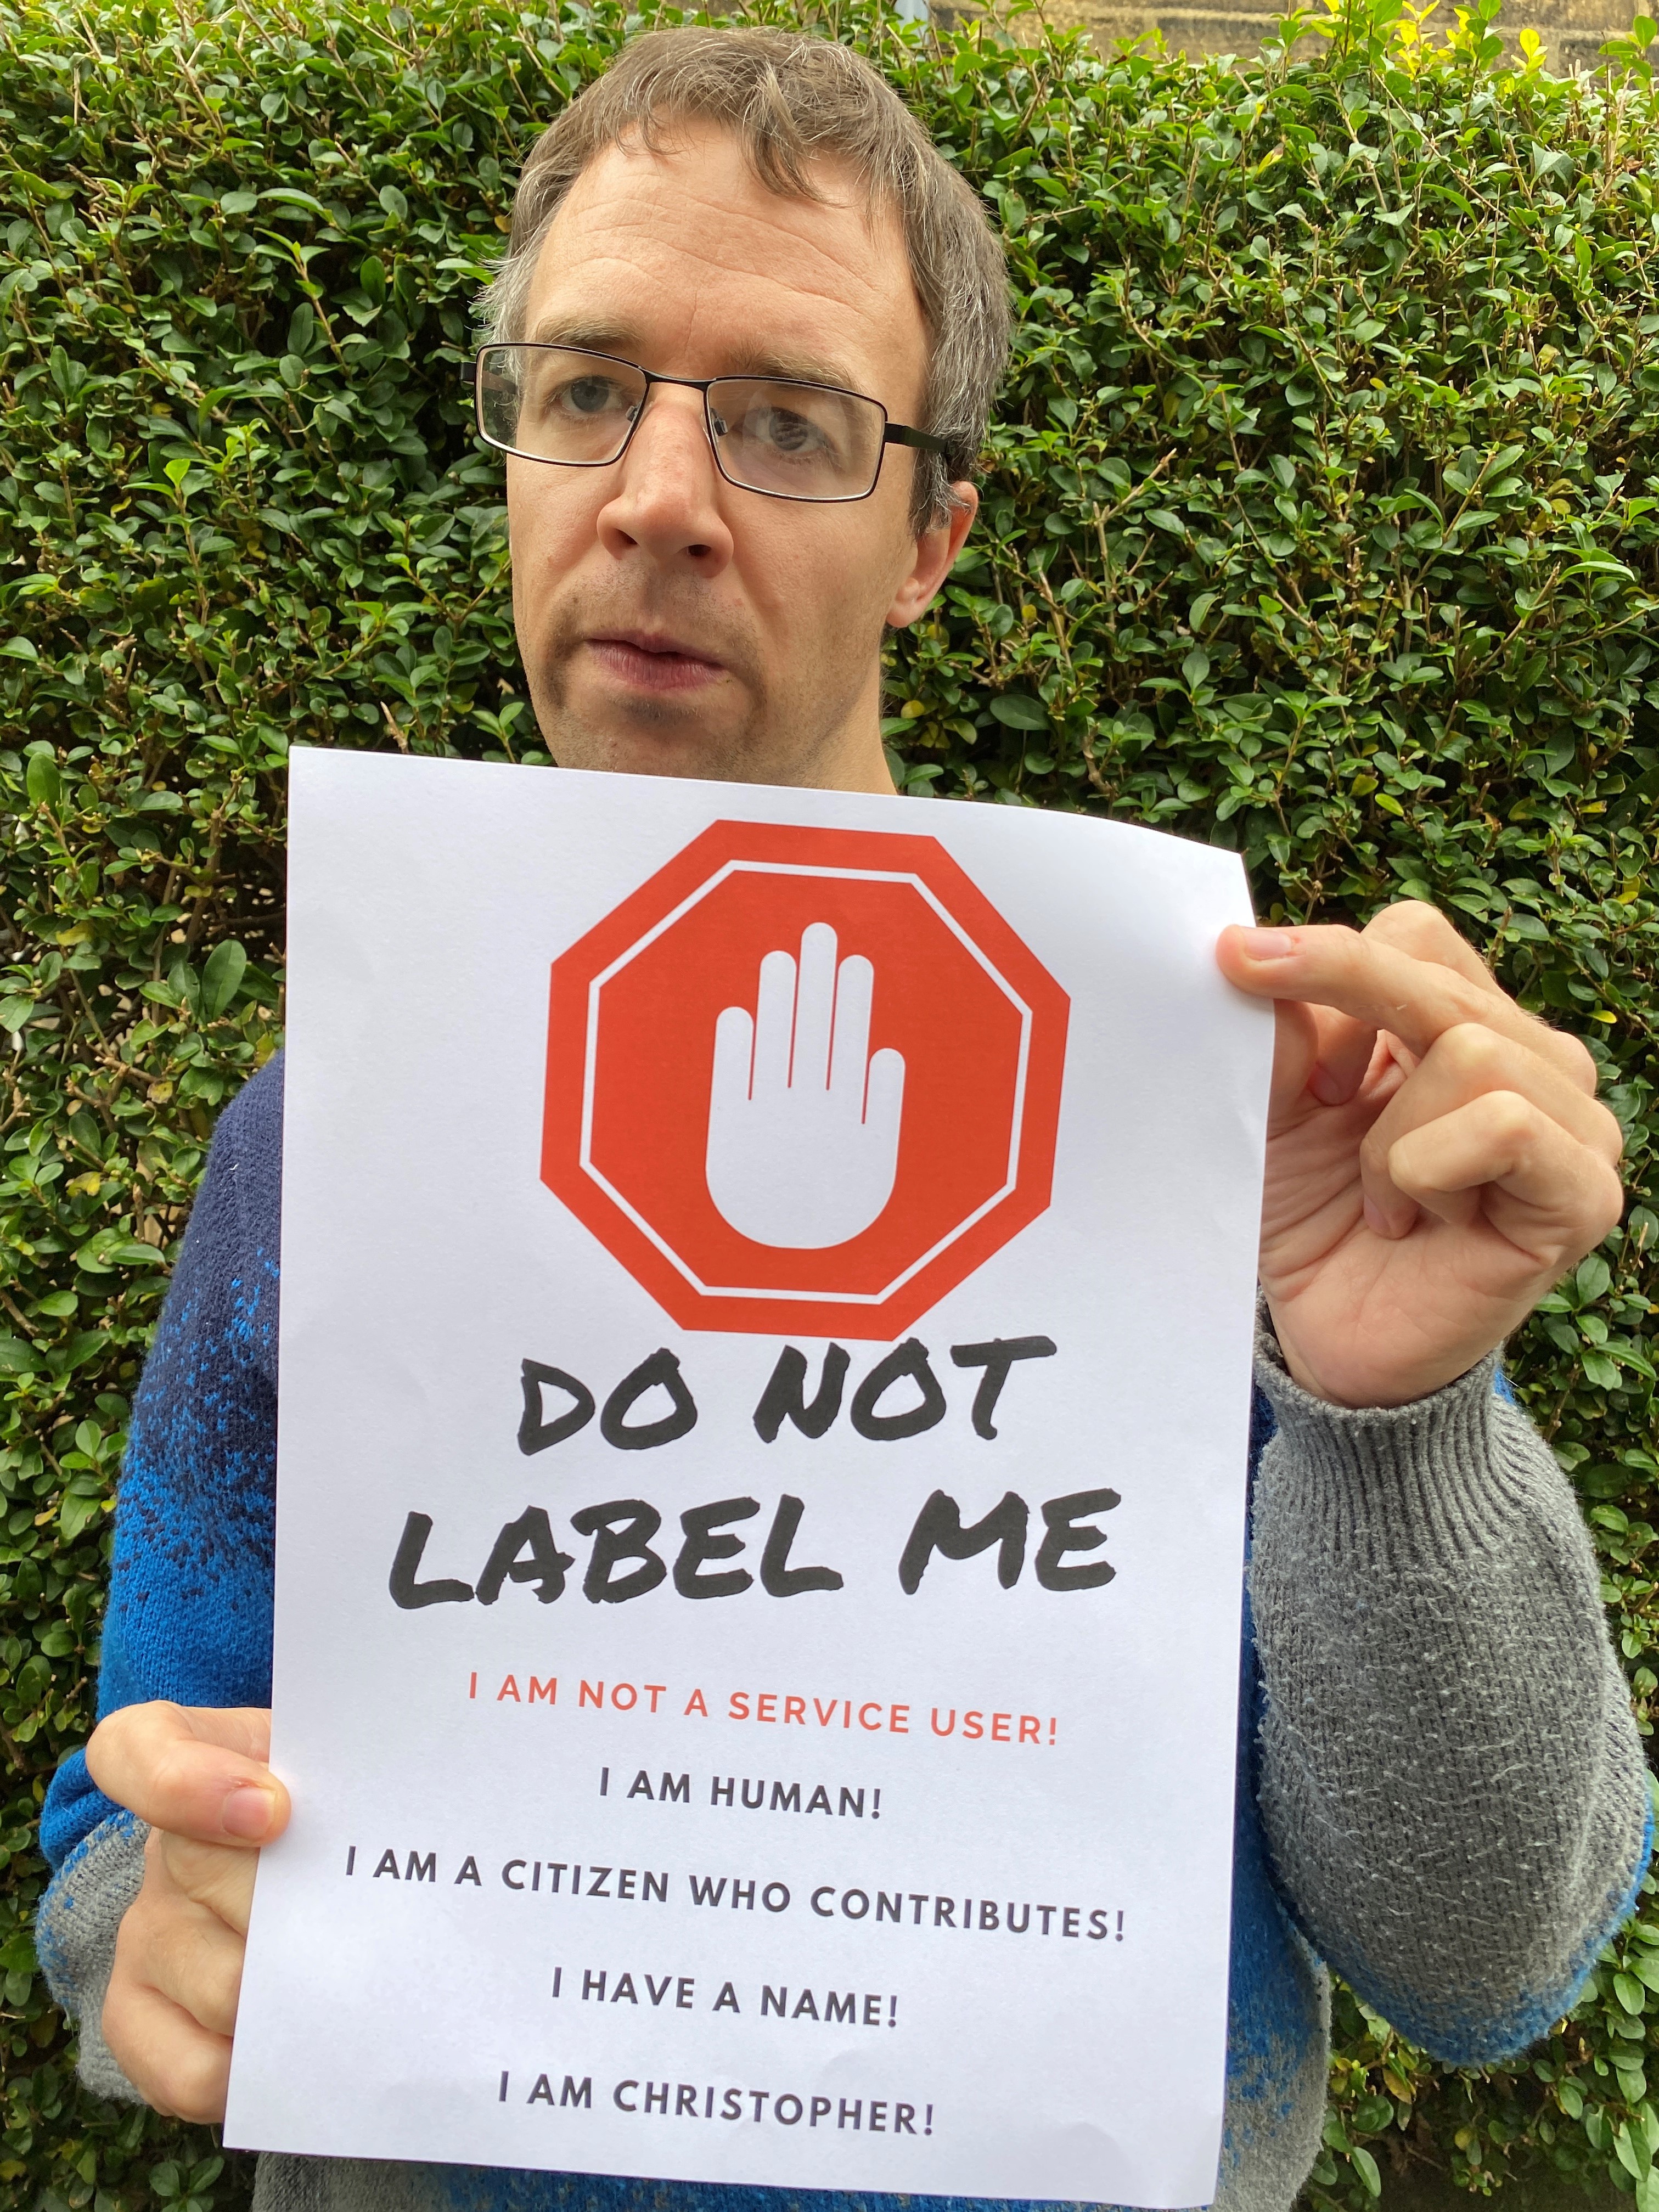 A photograph of Christopher holding a poster. The poster says 'Do not label me. I am not a service user! I am human! I am a citizen who contributes! I have a name! I am Christopher!